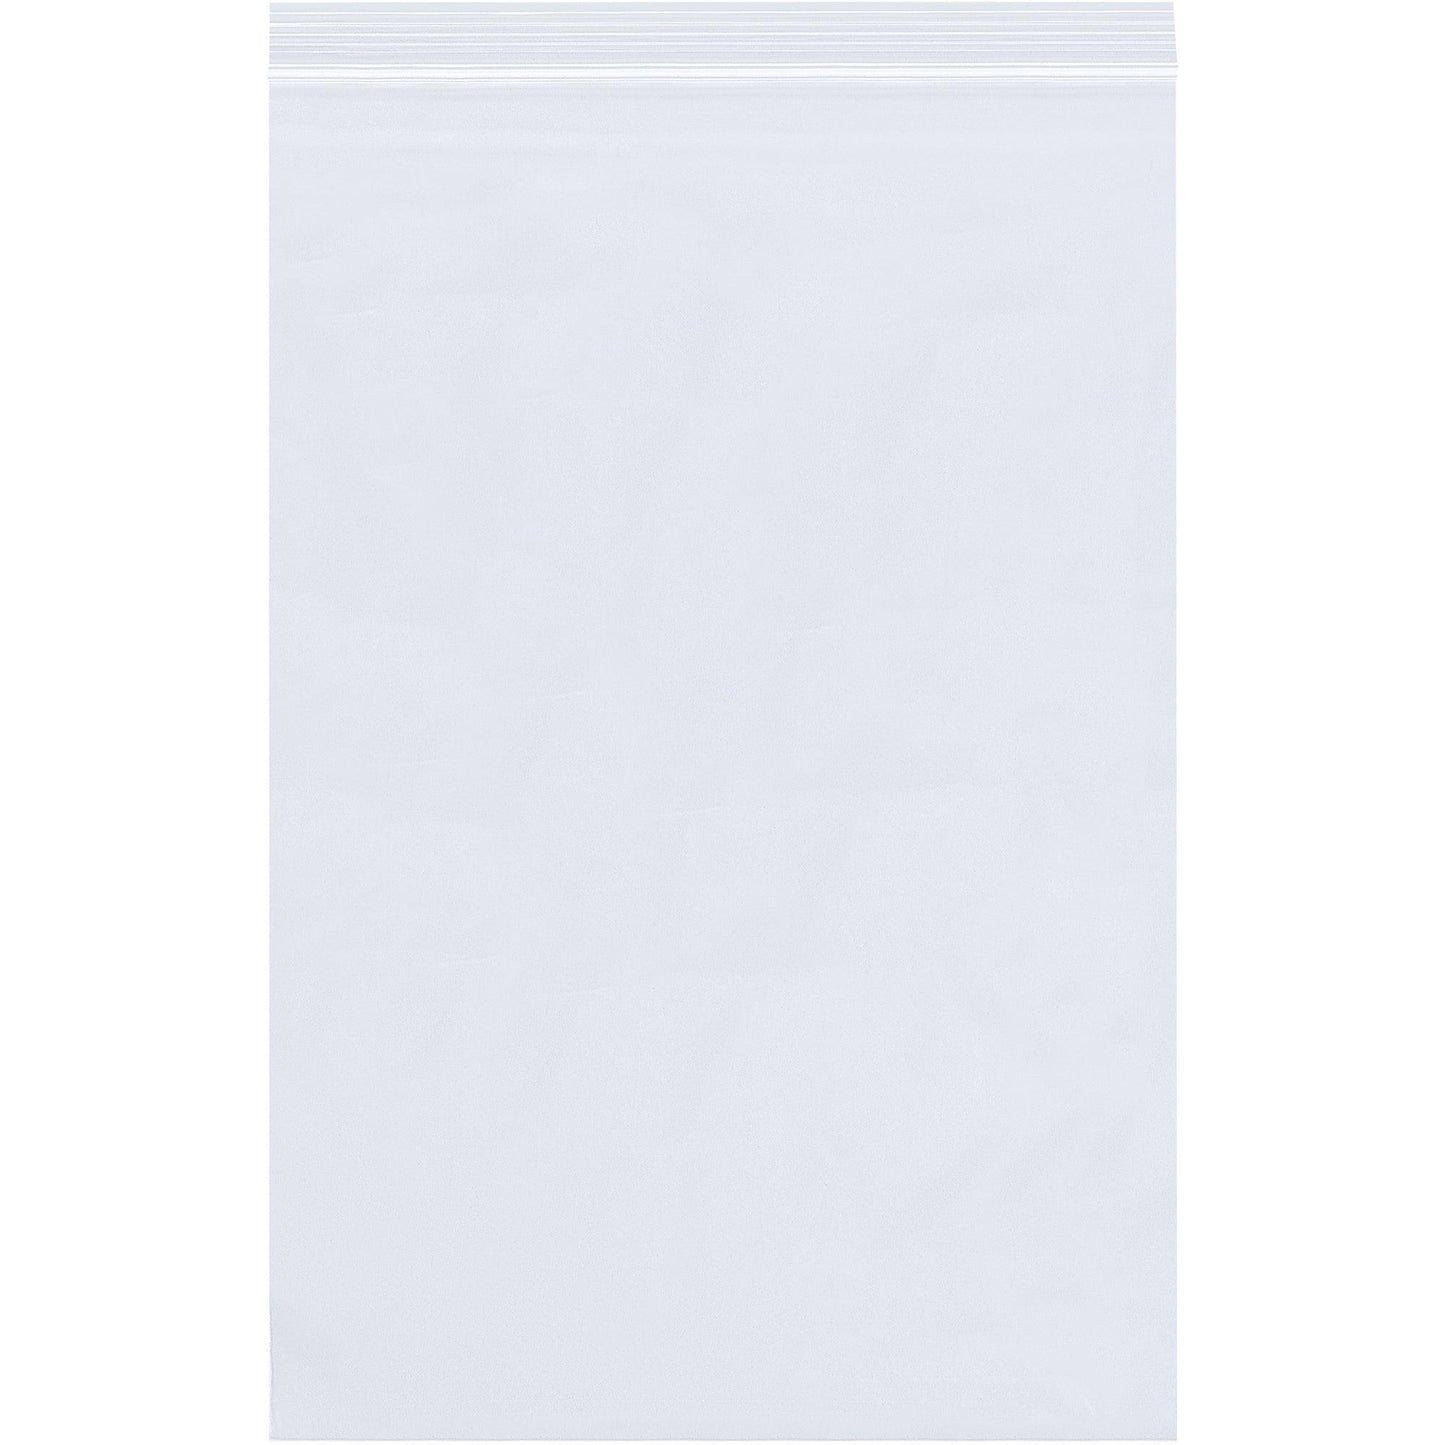 3 x 6" - 6 Mil Reclosable Poly Bags - PB3856